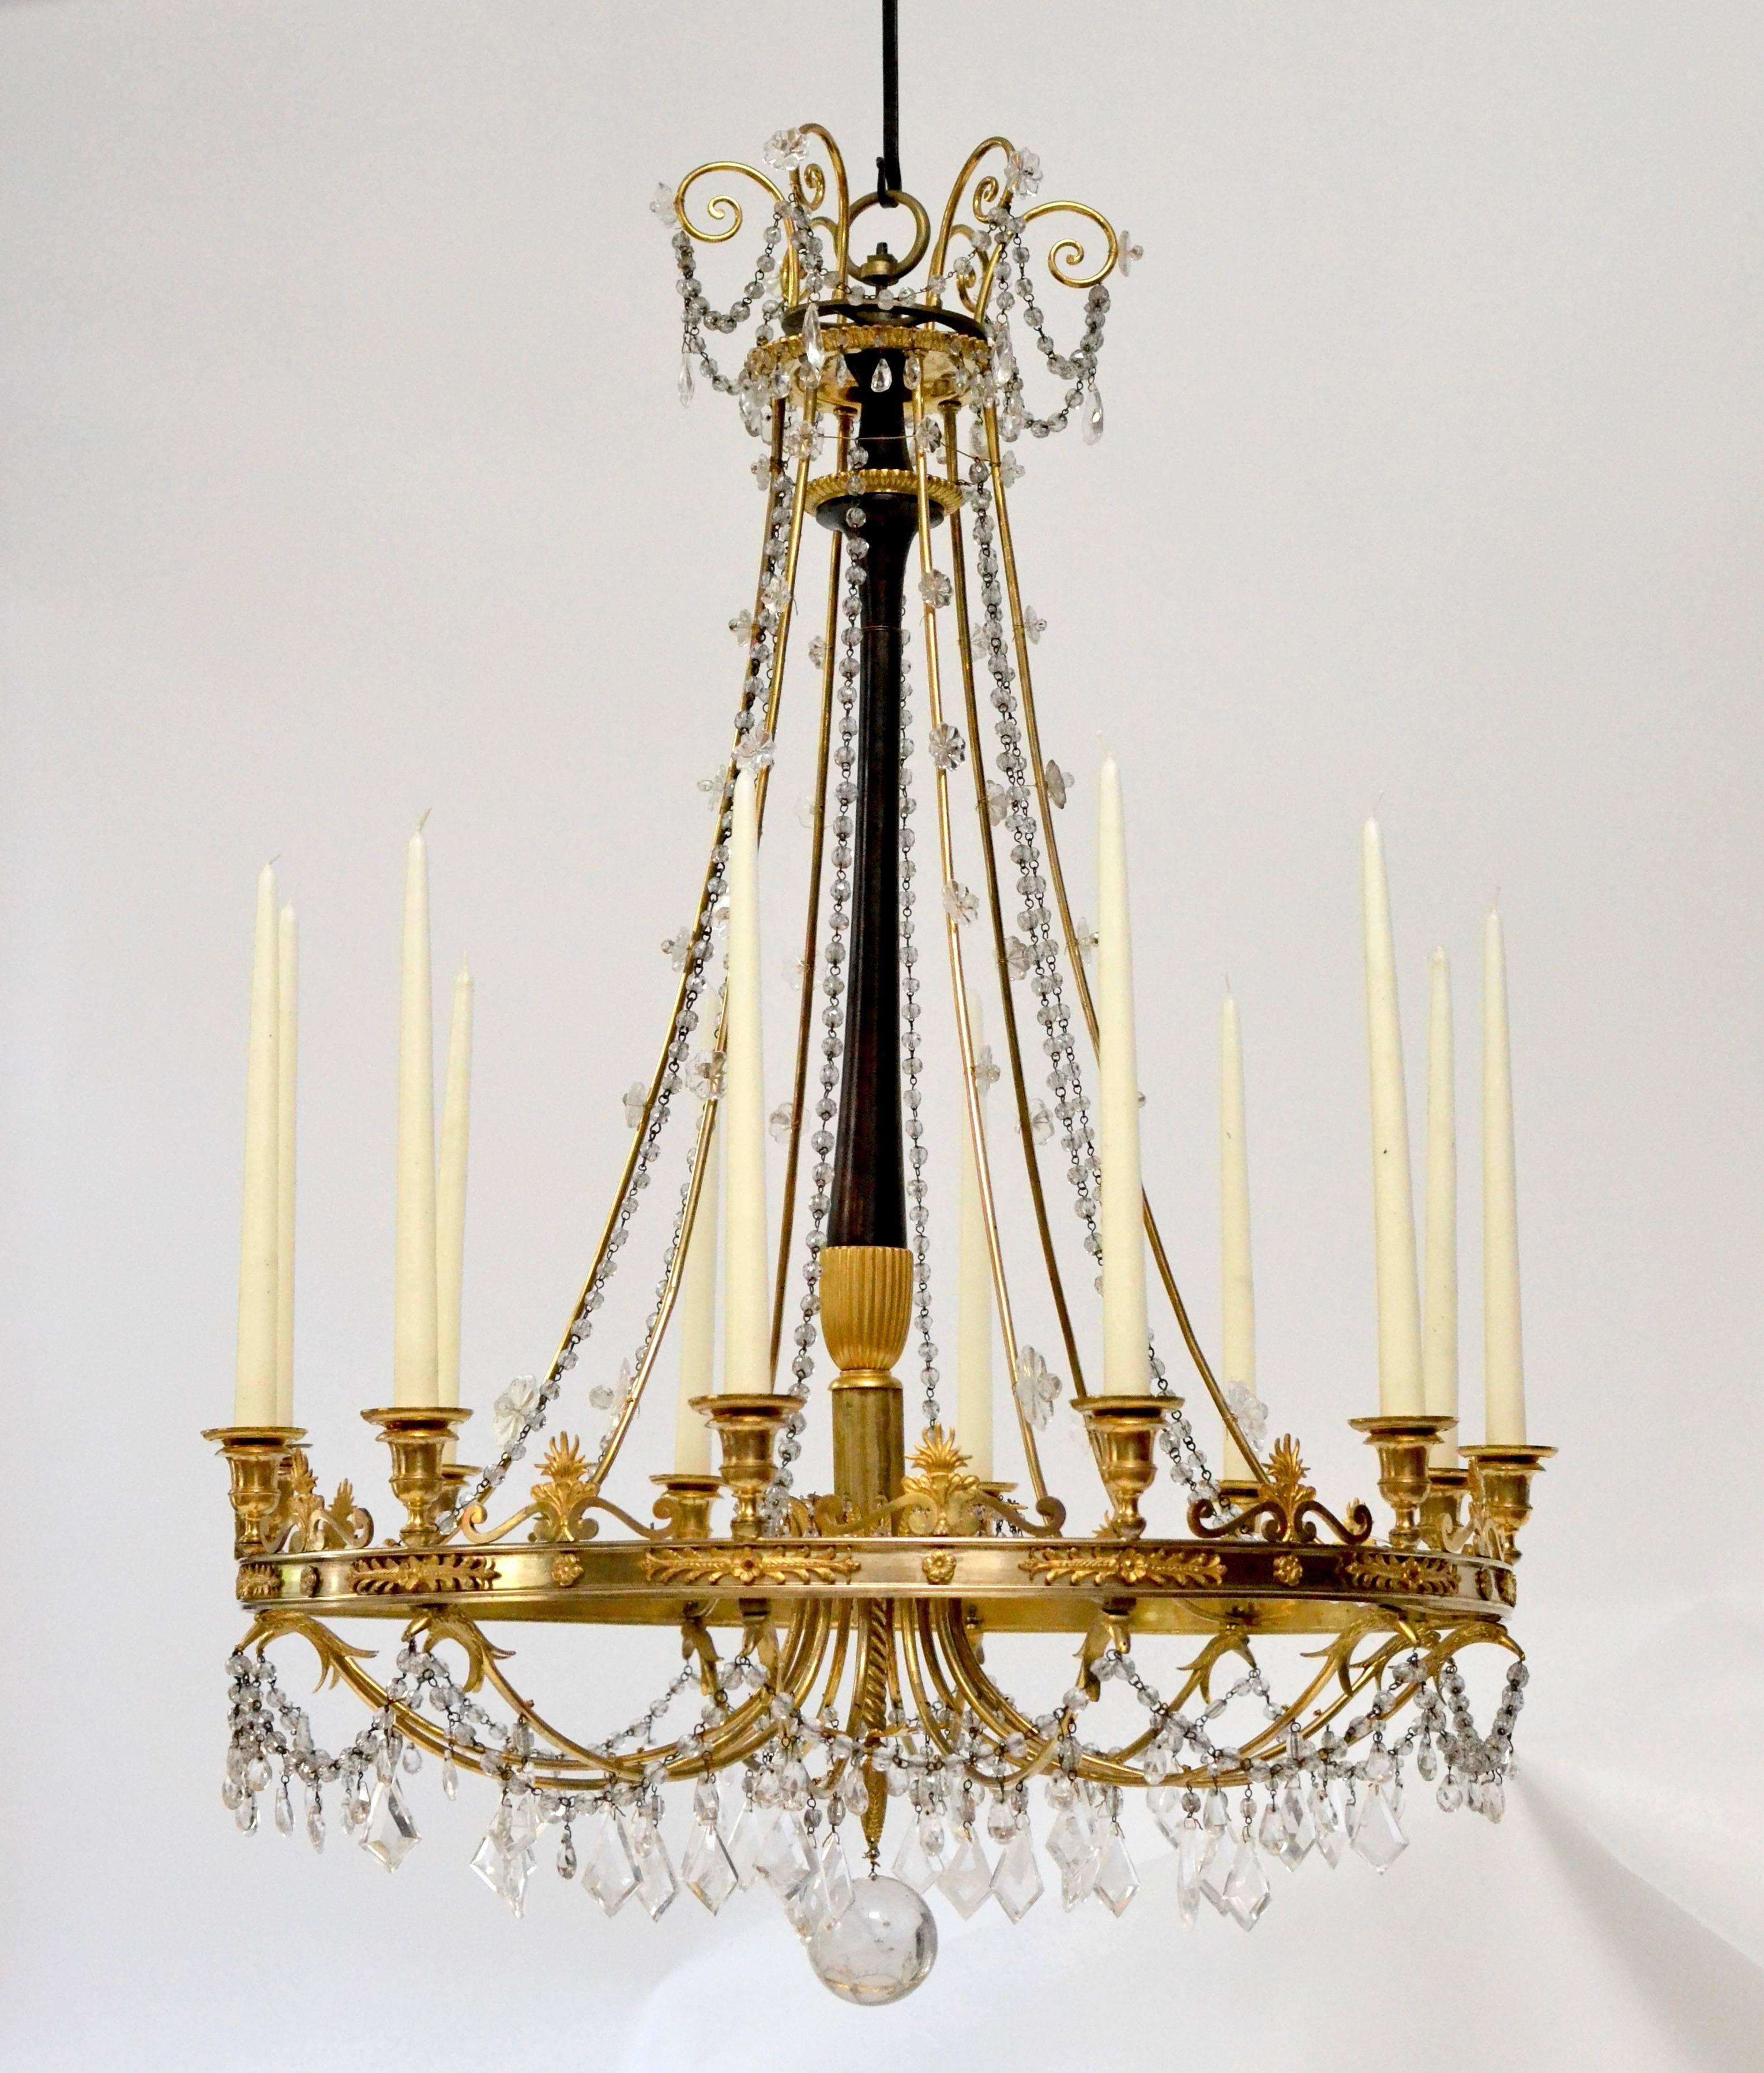 Empire French Early 19th Century Gilt and Patinated Bronze Chandelier with Crystals